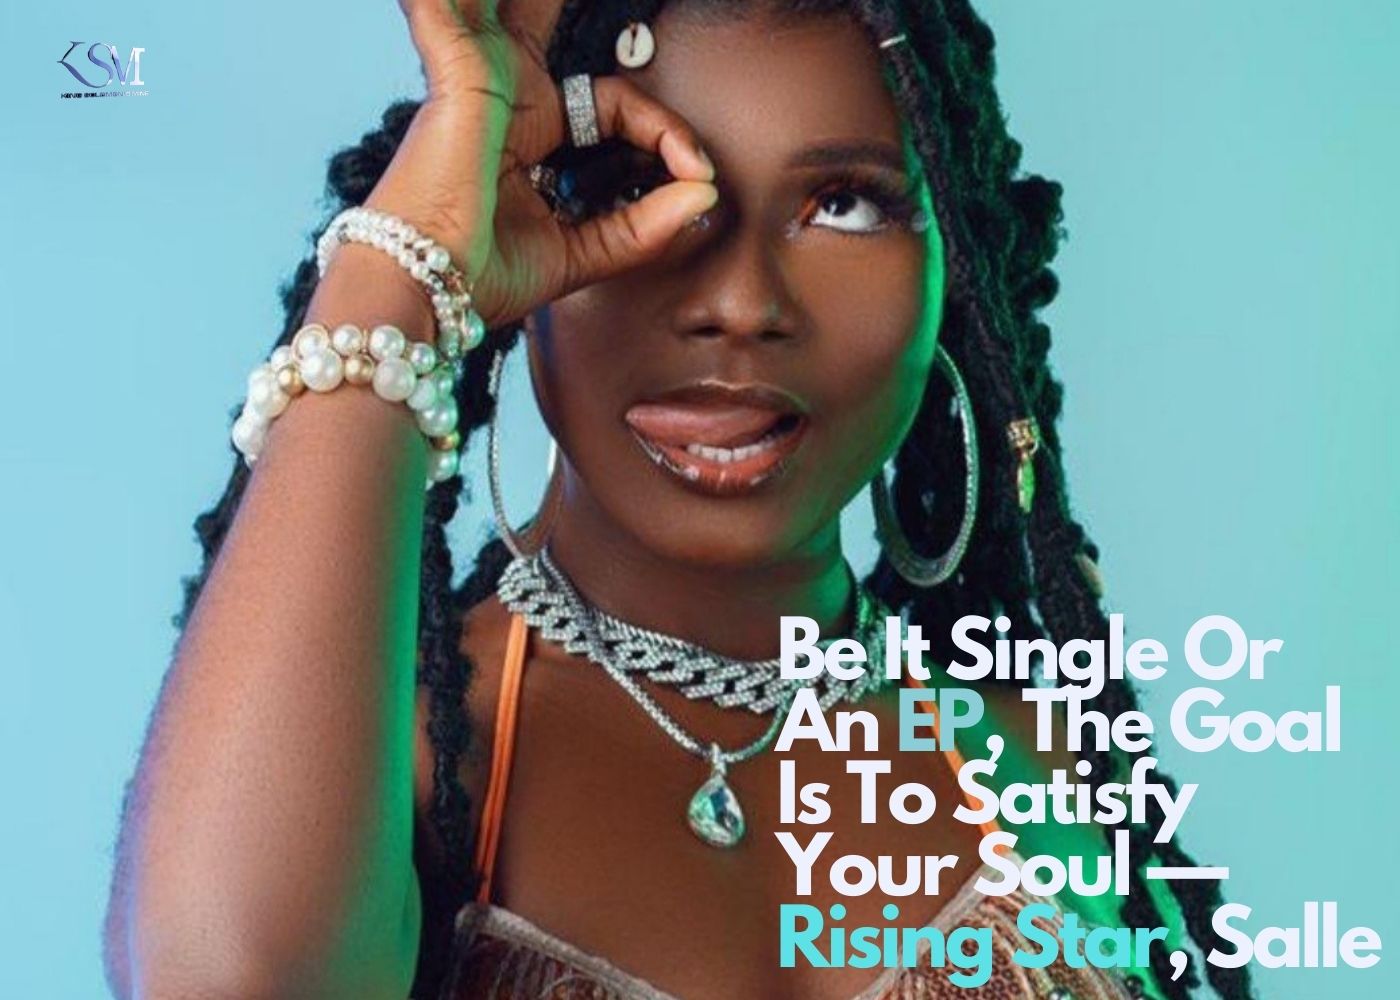 Be It Single Or An EP, The Goal Is To Satisfy Your Soul —Rising Star, Salle